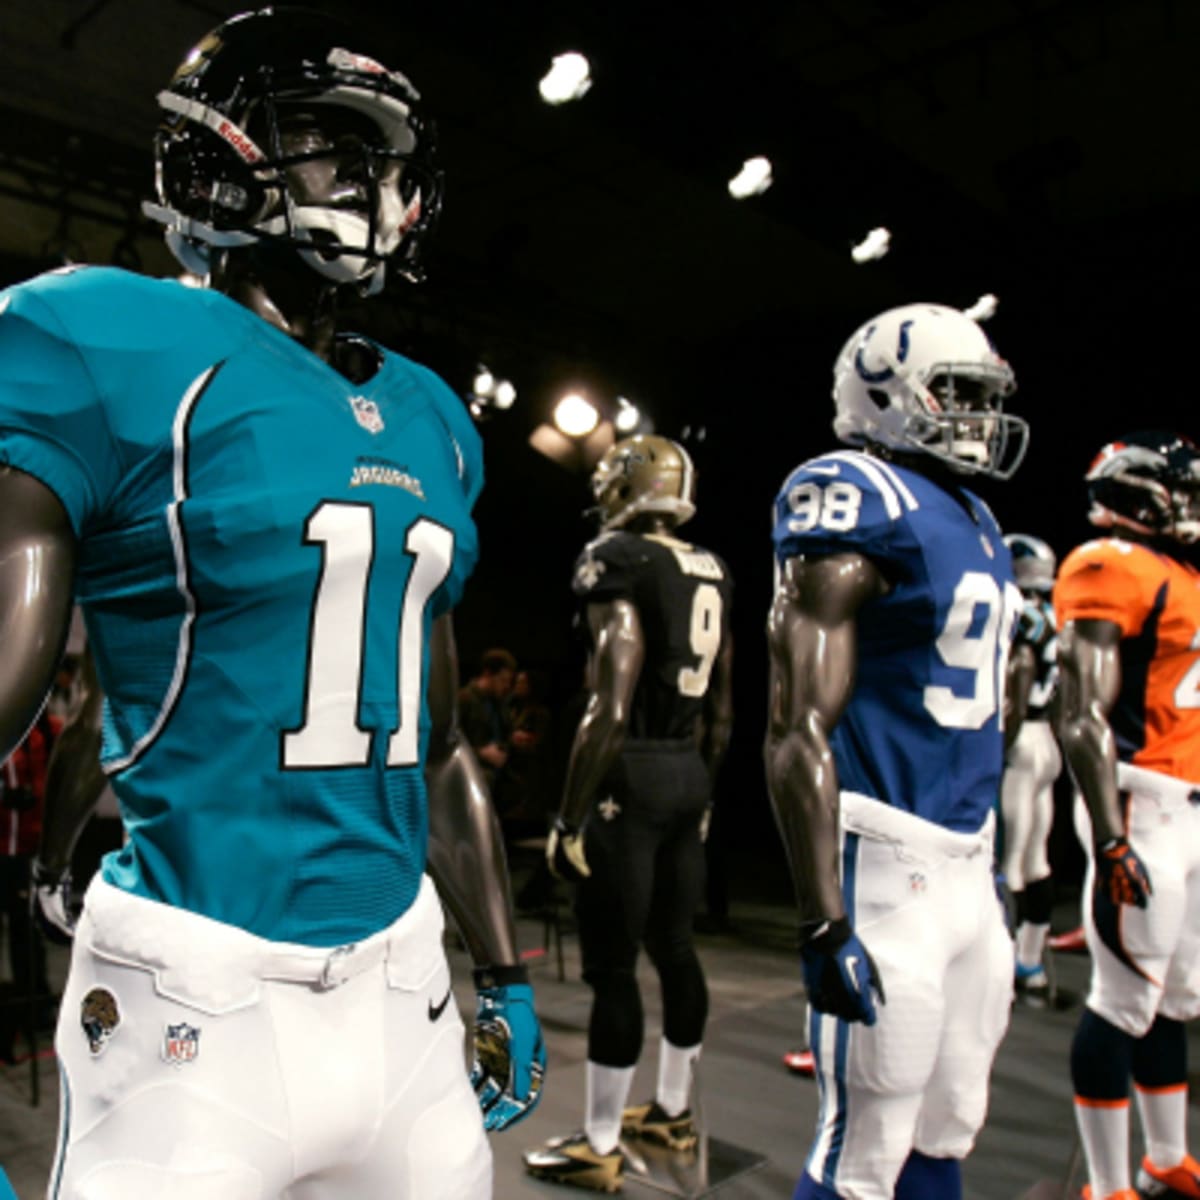 NFL Jerseys Cost $295, Thanks to Price Increase from Nike